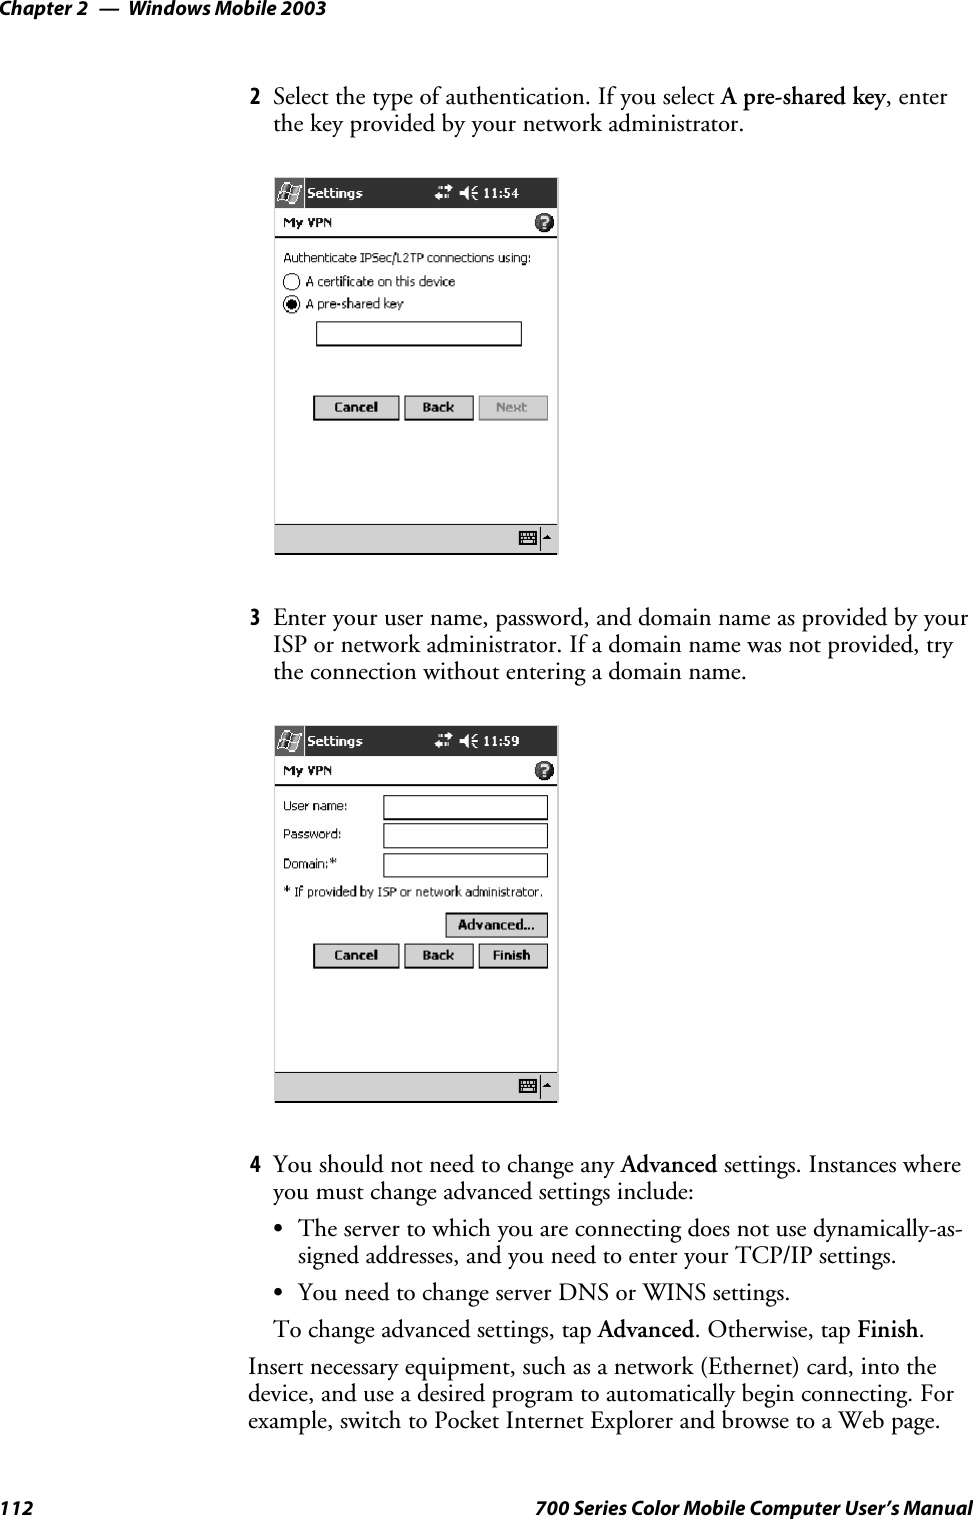 Windows Mobile 2003Chapter —2112 700 Series Color Mobile Computer User’s Manual2Select the type of authentication. If you select A pre-shared key,enterthe key provided by your network administrator.3Enter your user name, password, and domain name as provided by yourISP or network administrator. If a domain name was not provided, trythe connection without entering a domain name.4You should not need to change any Advanced settings. Instances whereyou must change advanced settings include:SThe server to which you are connecting does not use dynamically-as-signed addresses, and you need to enter your TCP/IP settings.SYou need to change server DNS or WINS settings.To change advanced settings, tap Advanced.Otherwise,tapFinish.Insert necessary equipment, such as a network (Ethernet) card, into thedevice, and use a desired program to automatically begin connecting. Forexample, switch to Pocket Internet Explorer and browse to a Web page.